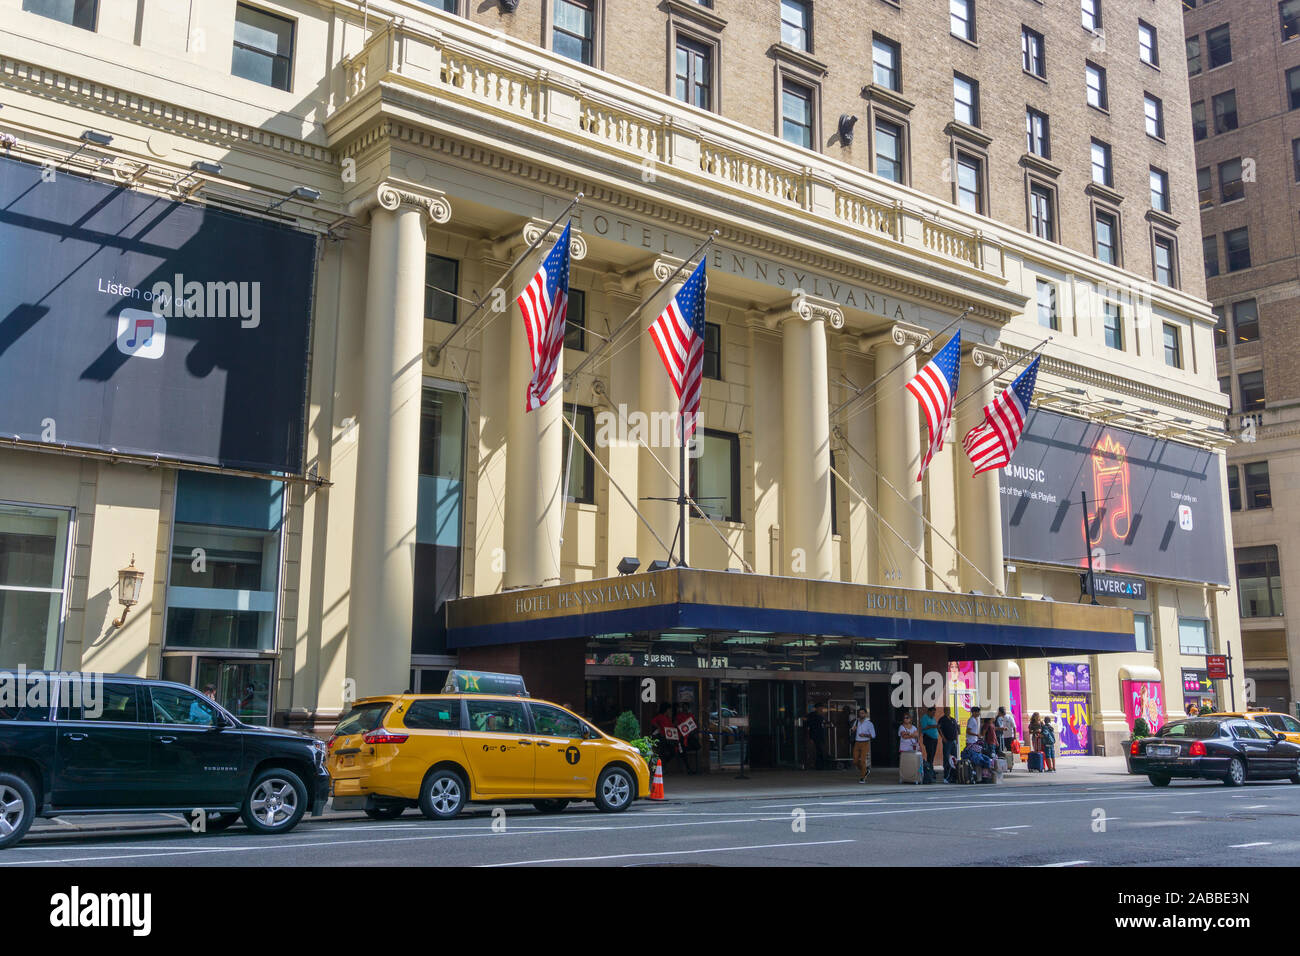 New York, USA - August 20, 2018: The Hotel Pennsylvania is a hotel located at 401 Seventh Avenue  in Manhattan, New York City. Stock Photo